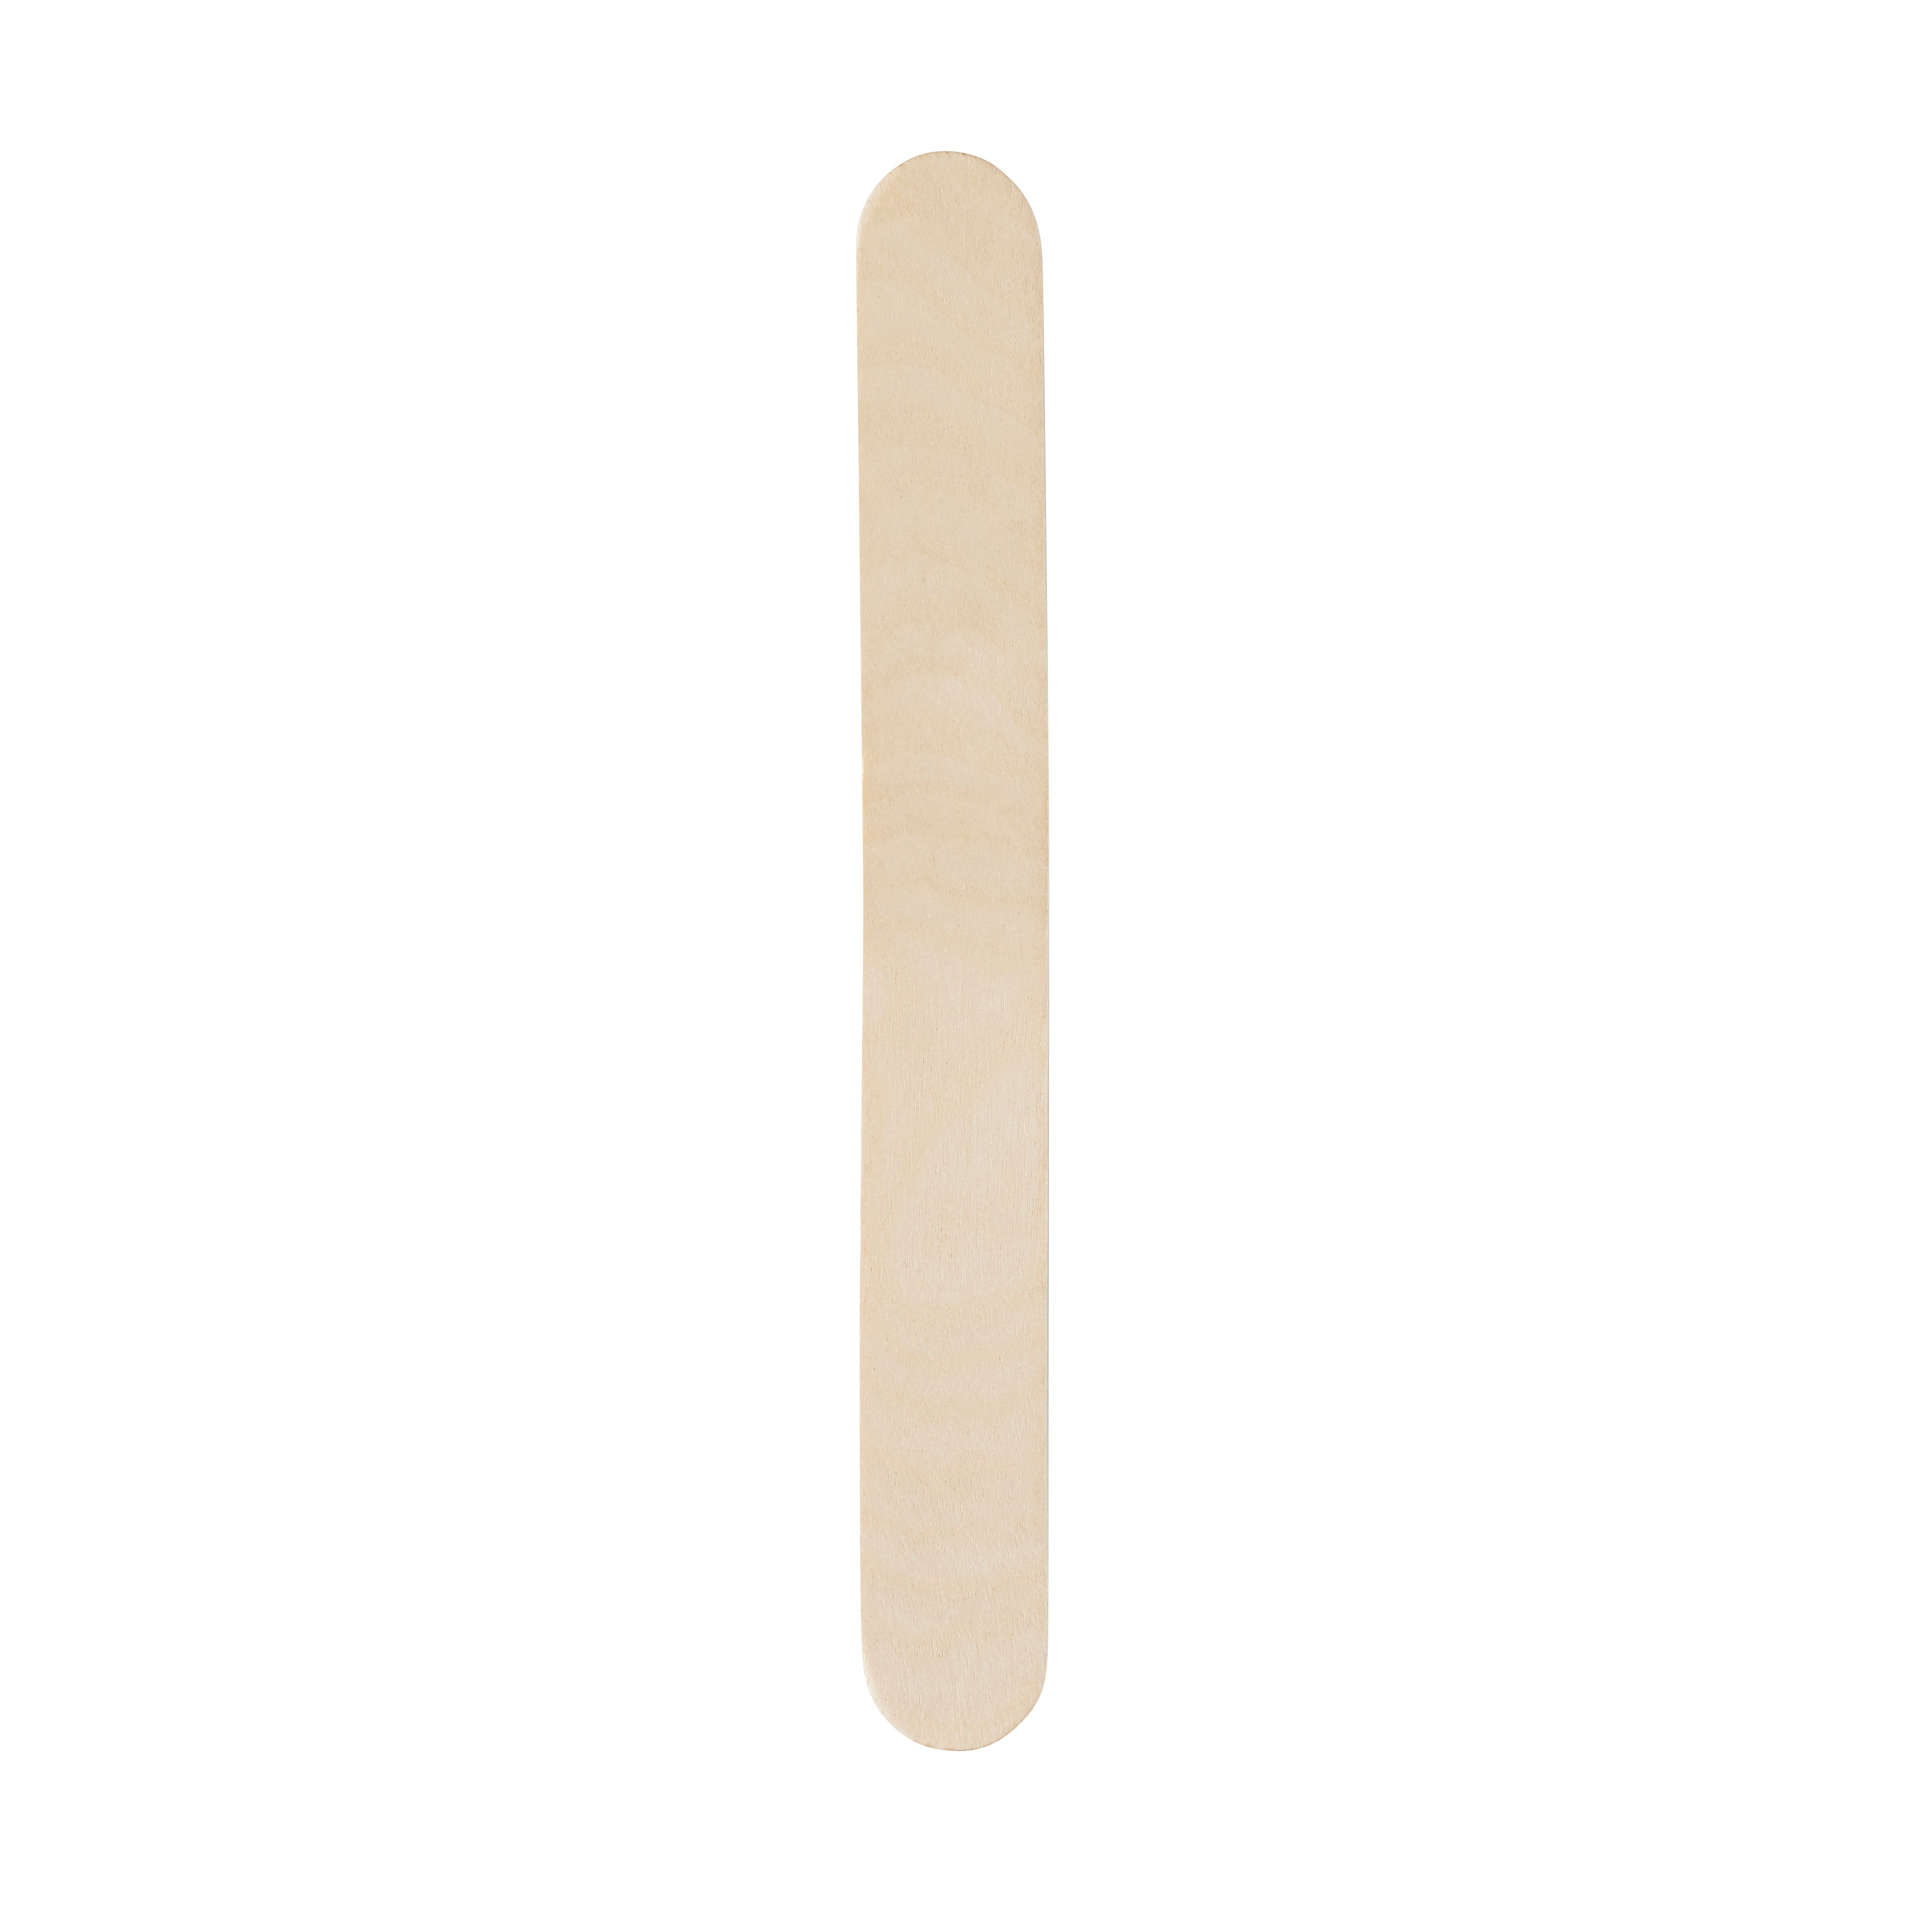 Baker Ross FE332 Natural Wooden Construction Sticks - Pack of 200, Wooden Craft Sticks for Kids Arts and Crafts Projects, Ideal for Wood Craft and Mo